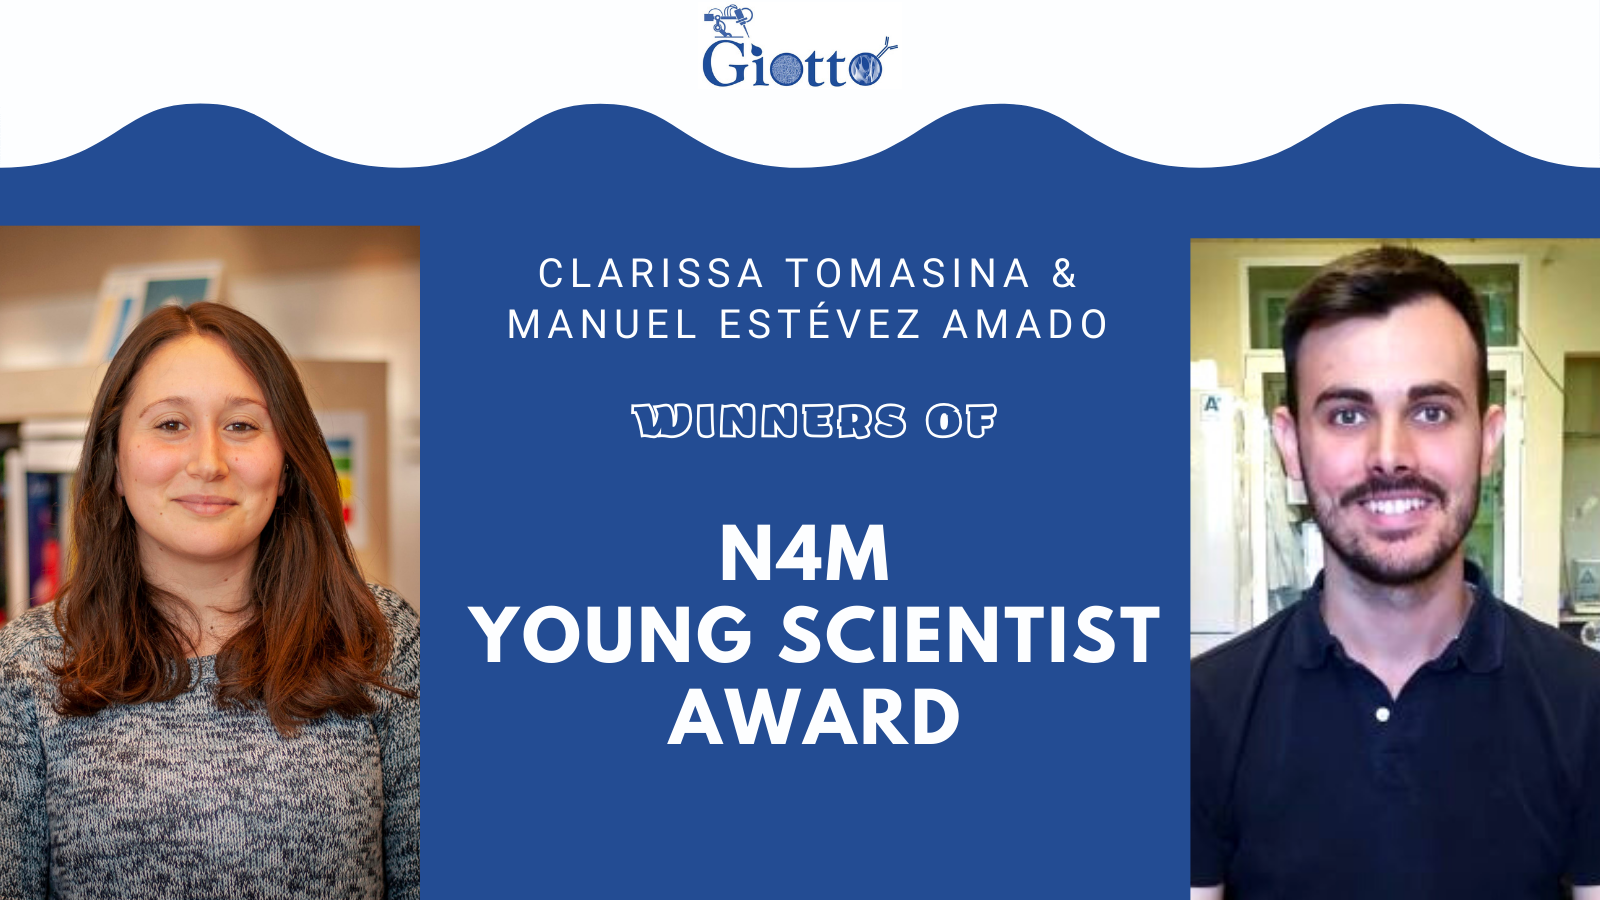 N4M Young Scientist Award